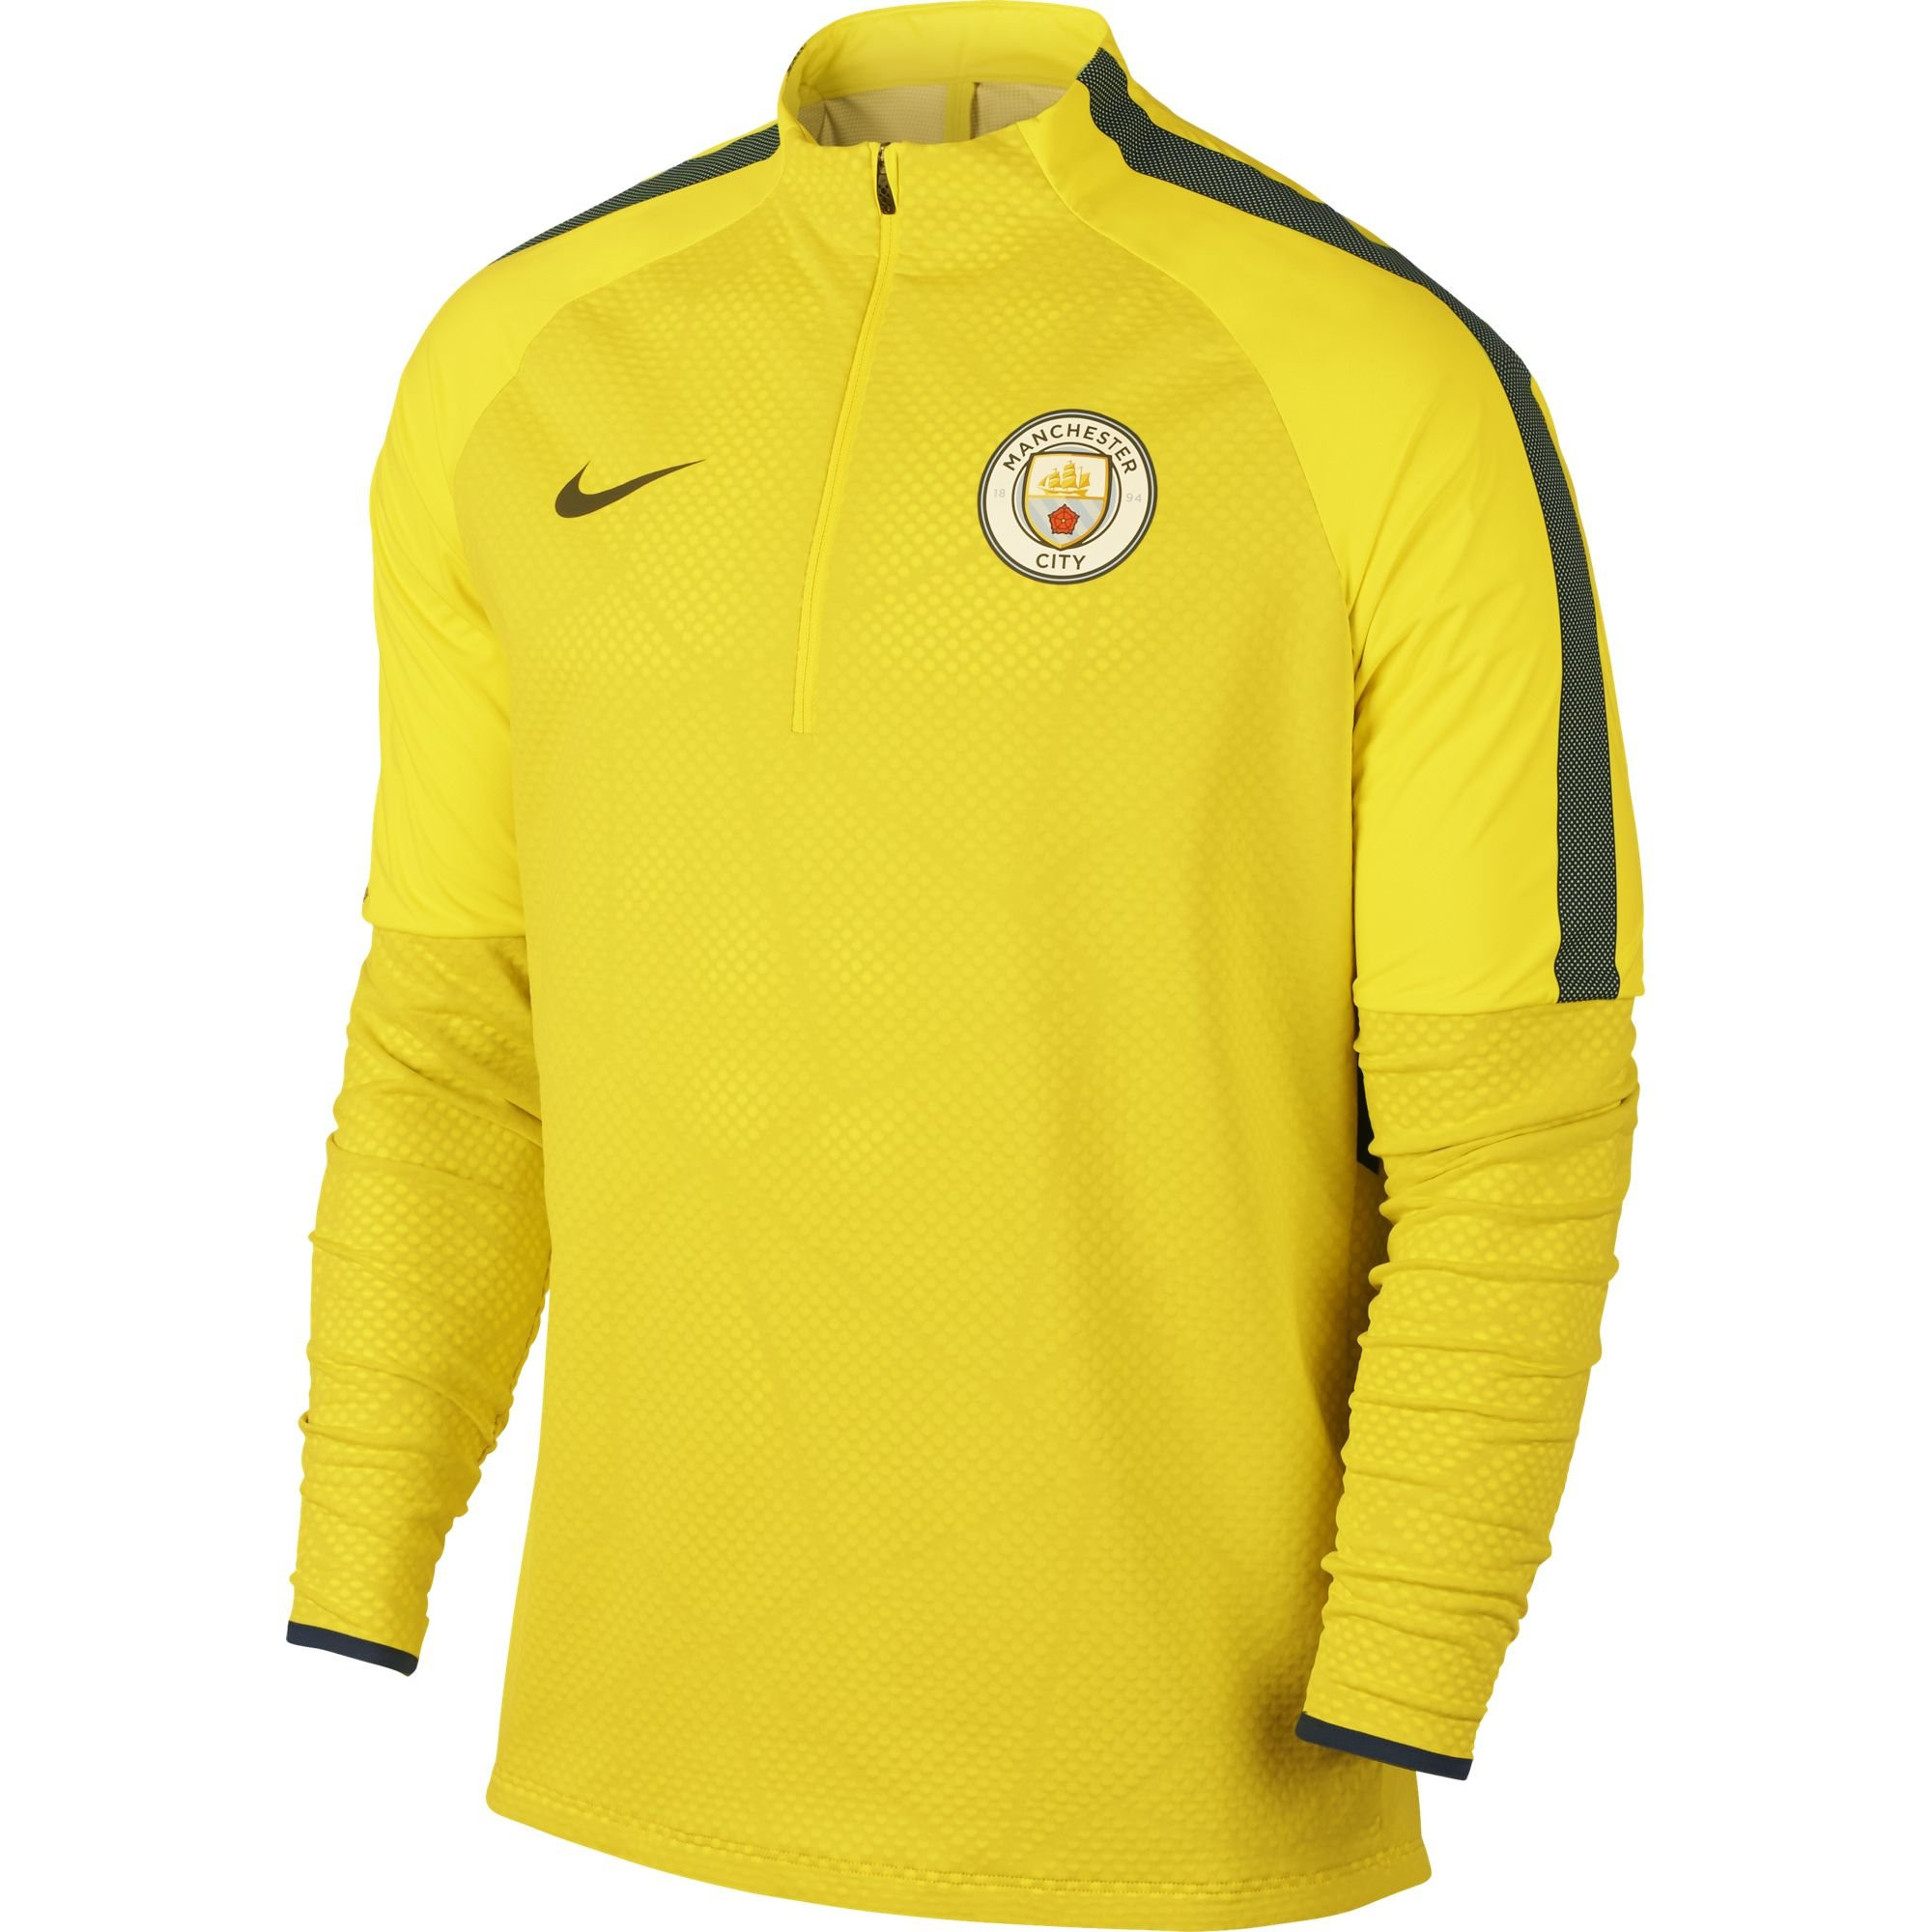 NIKE MANCHESTER CITY TRG TOP SHIELD JAUNE 2016/2017